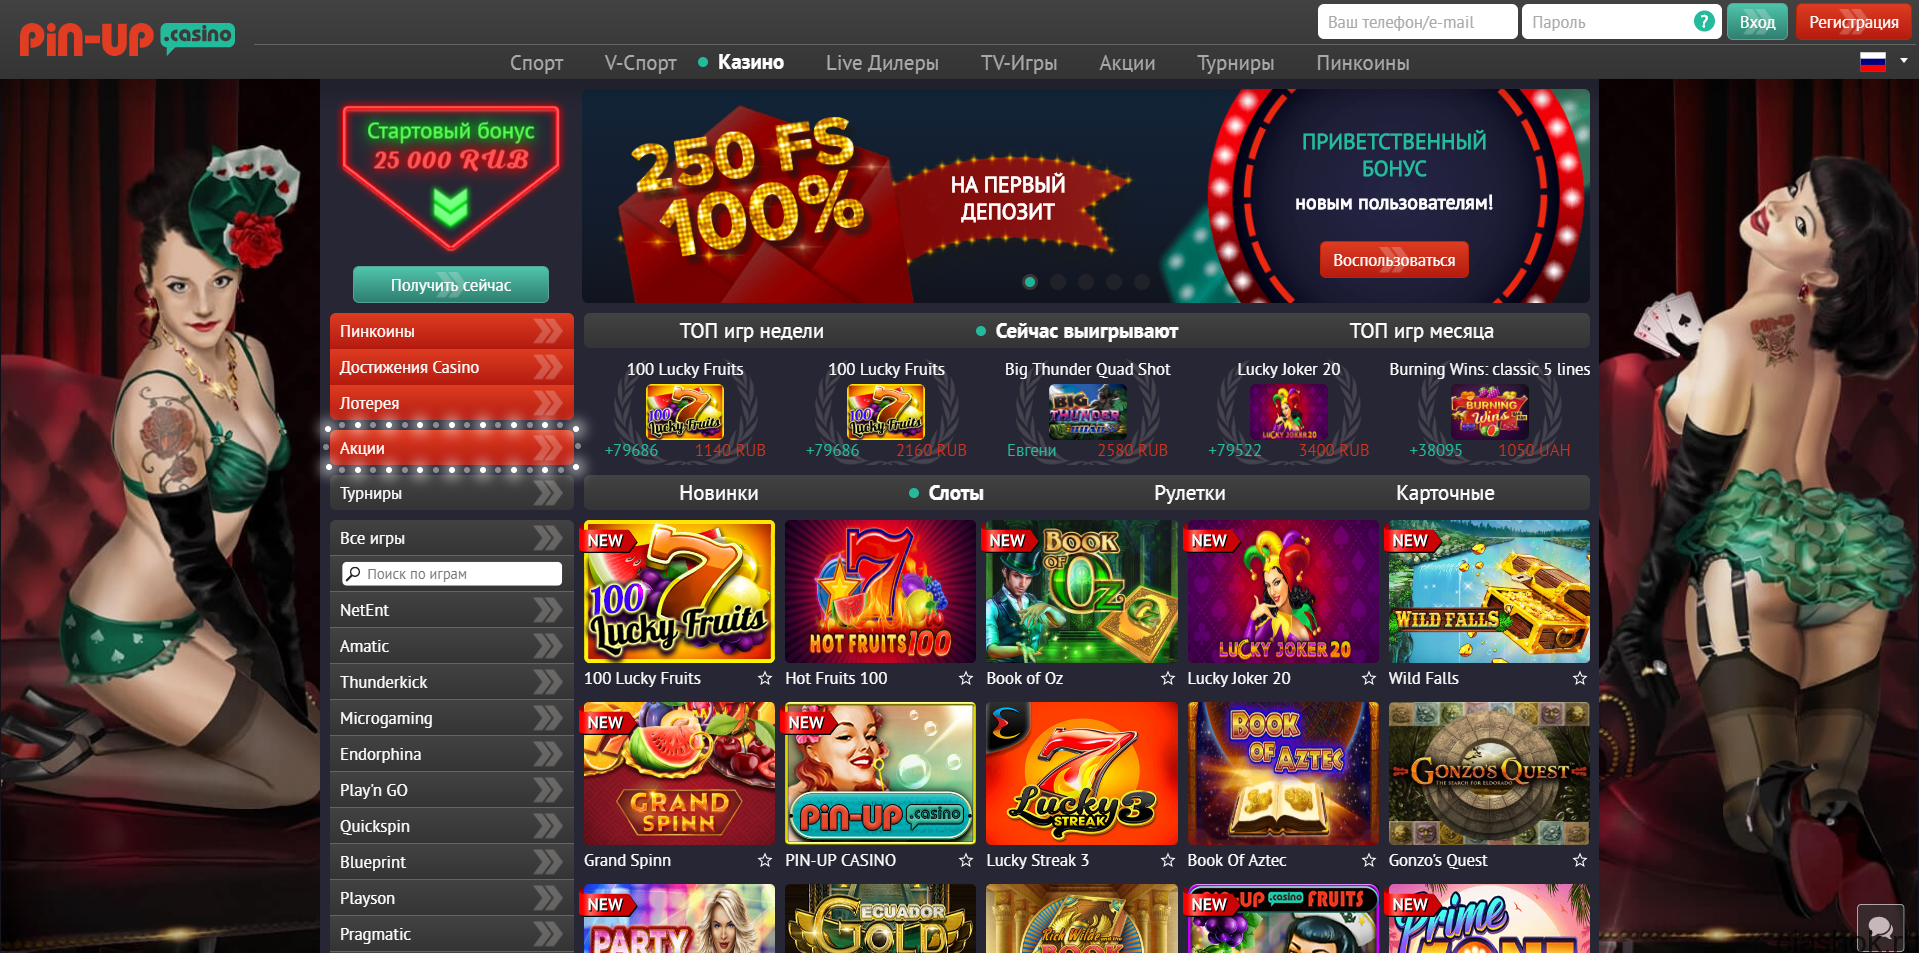 Pin up 365 casino мостбет www mostbet android ru